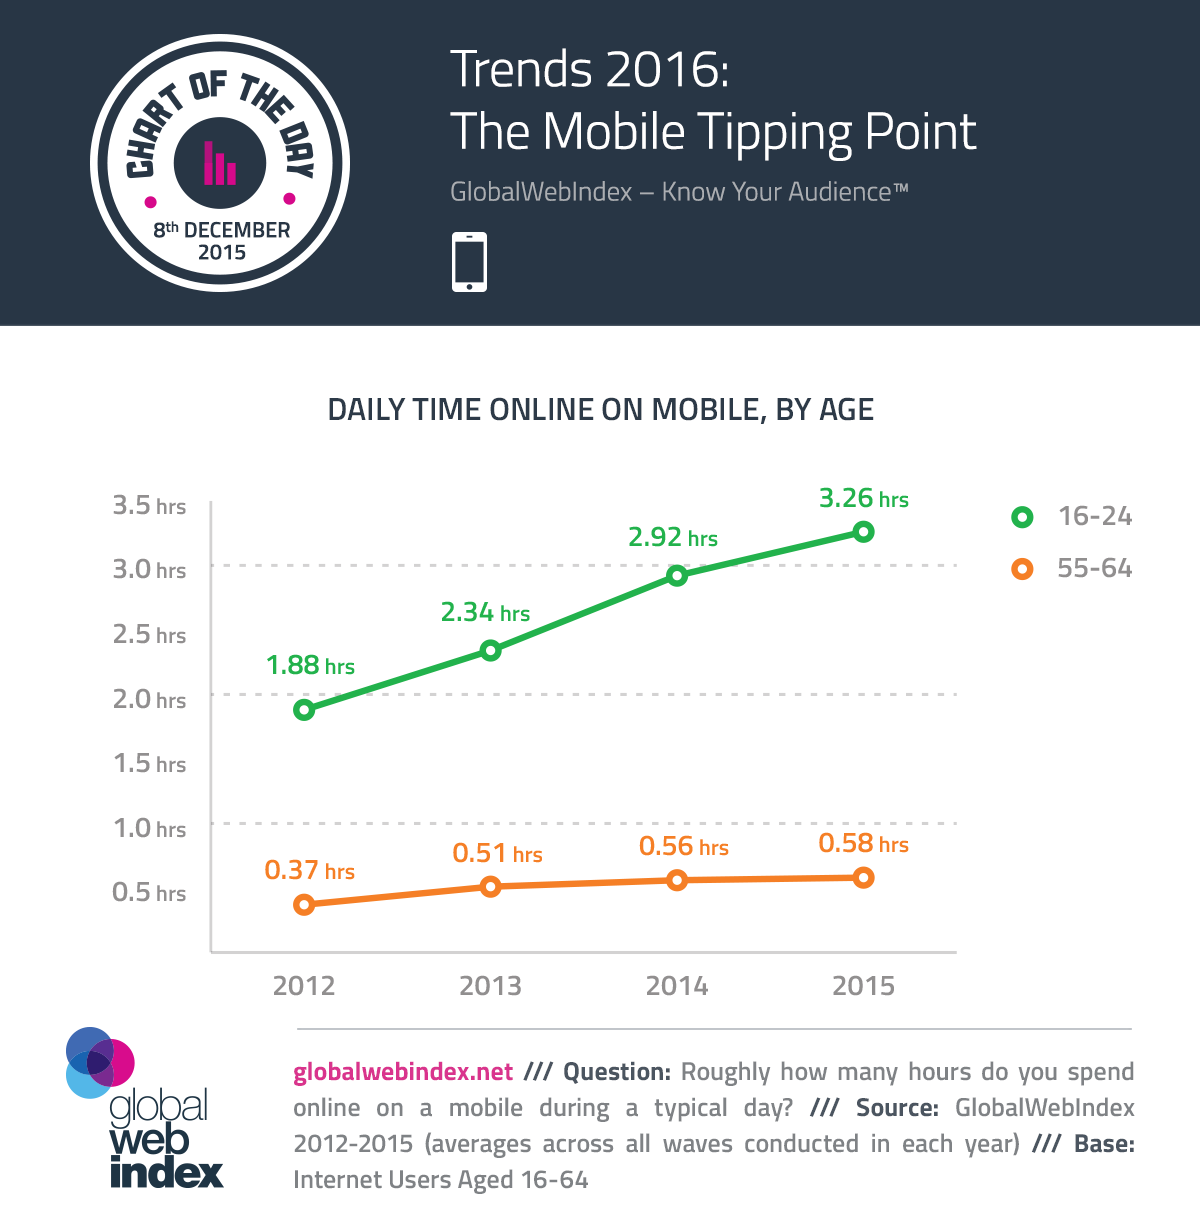 Trends 2016: The Mobile Tipping Point